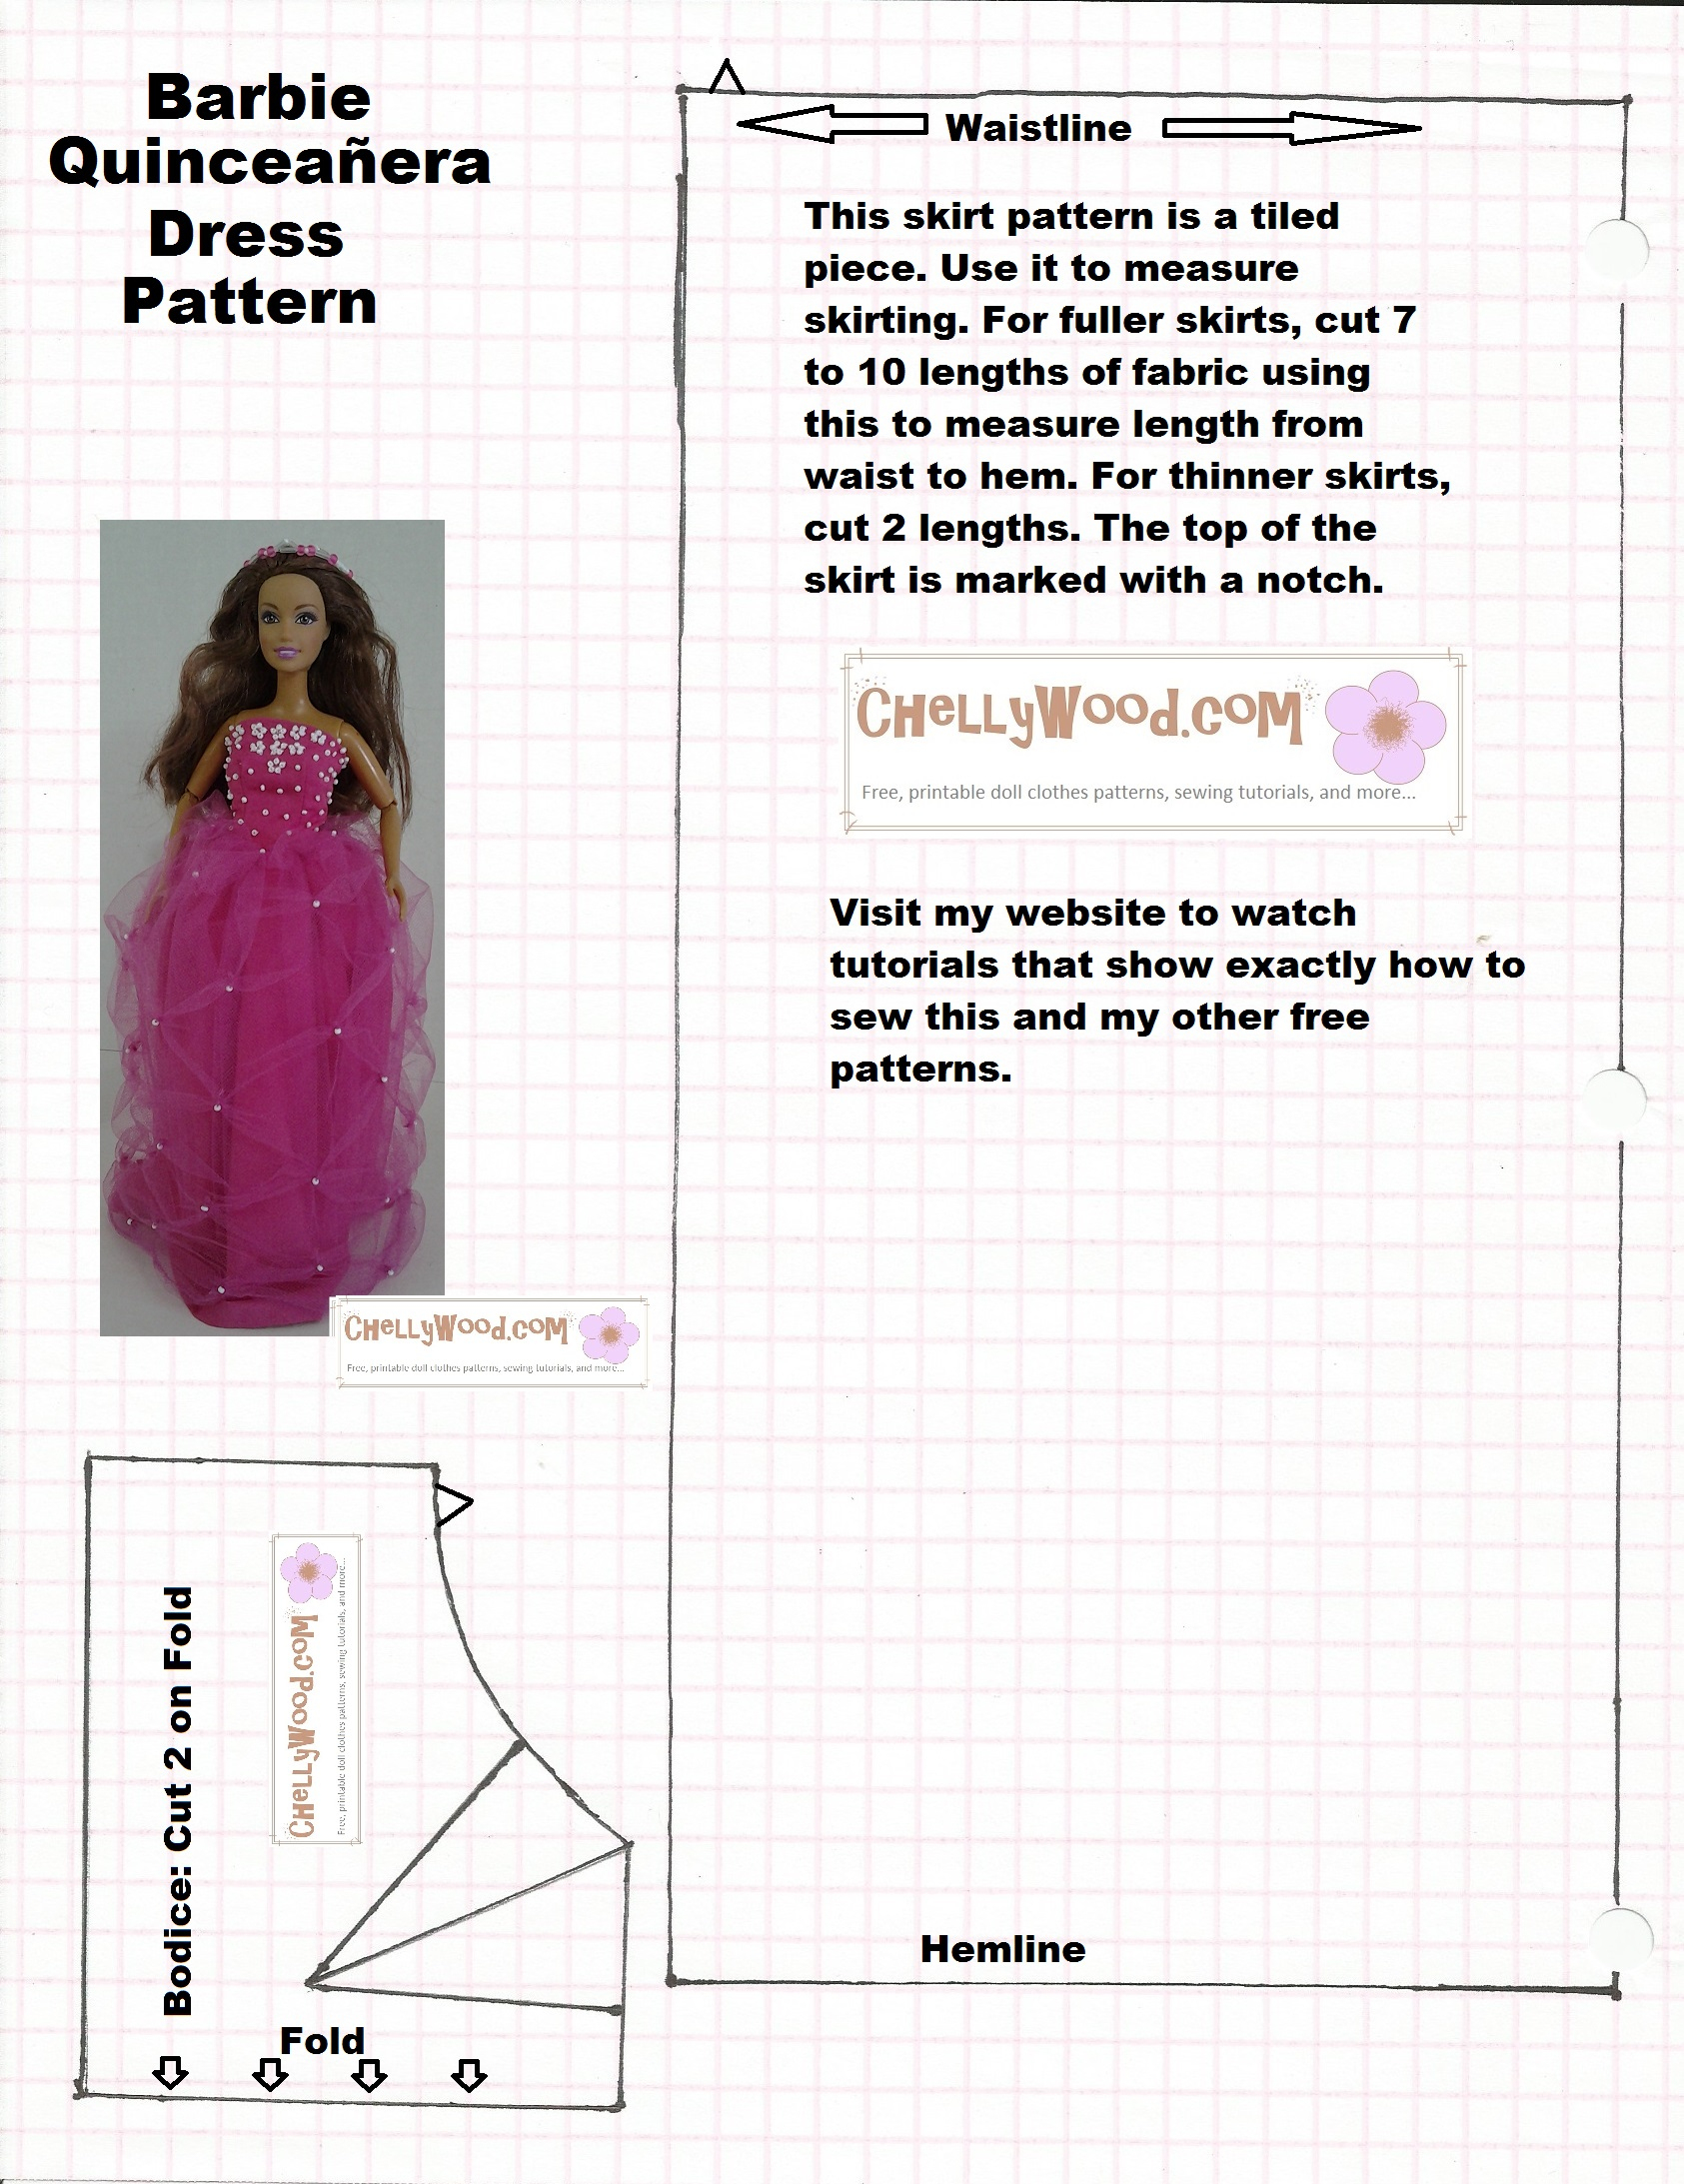 Old Pattern Page – Chellywood - Free Printable Patterns For Sewing Doll Clothes